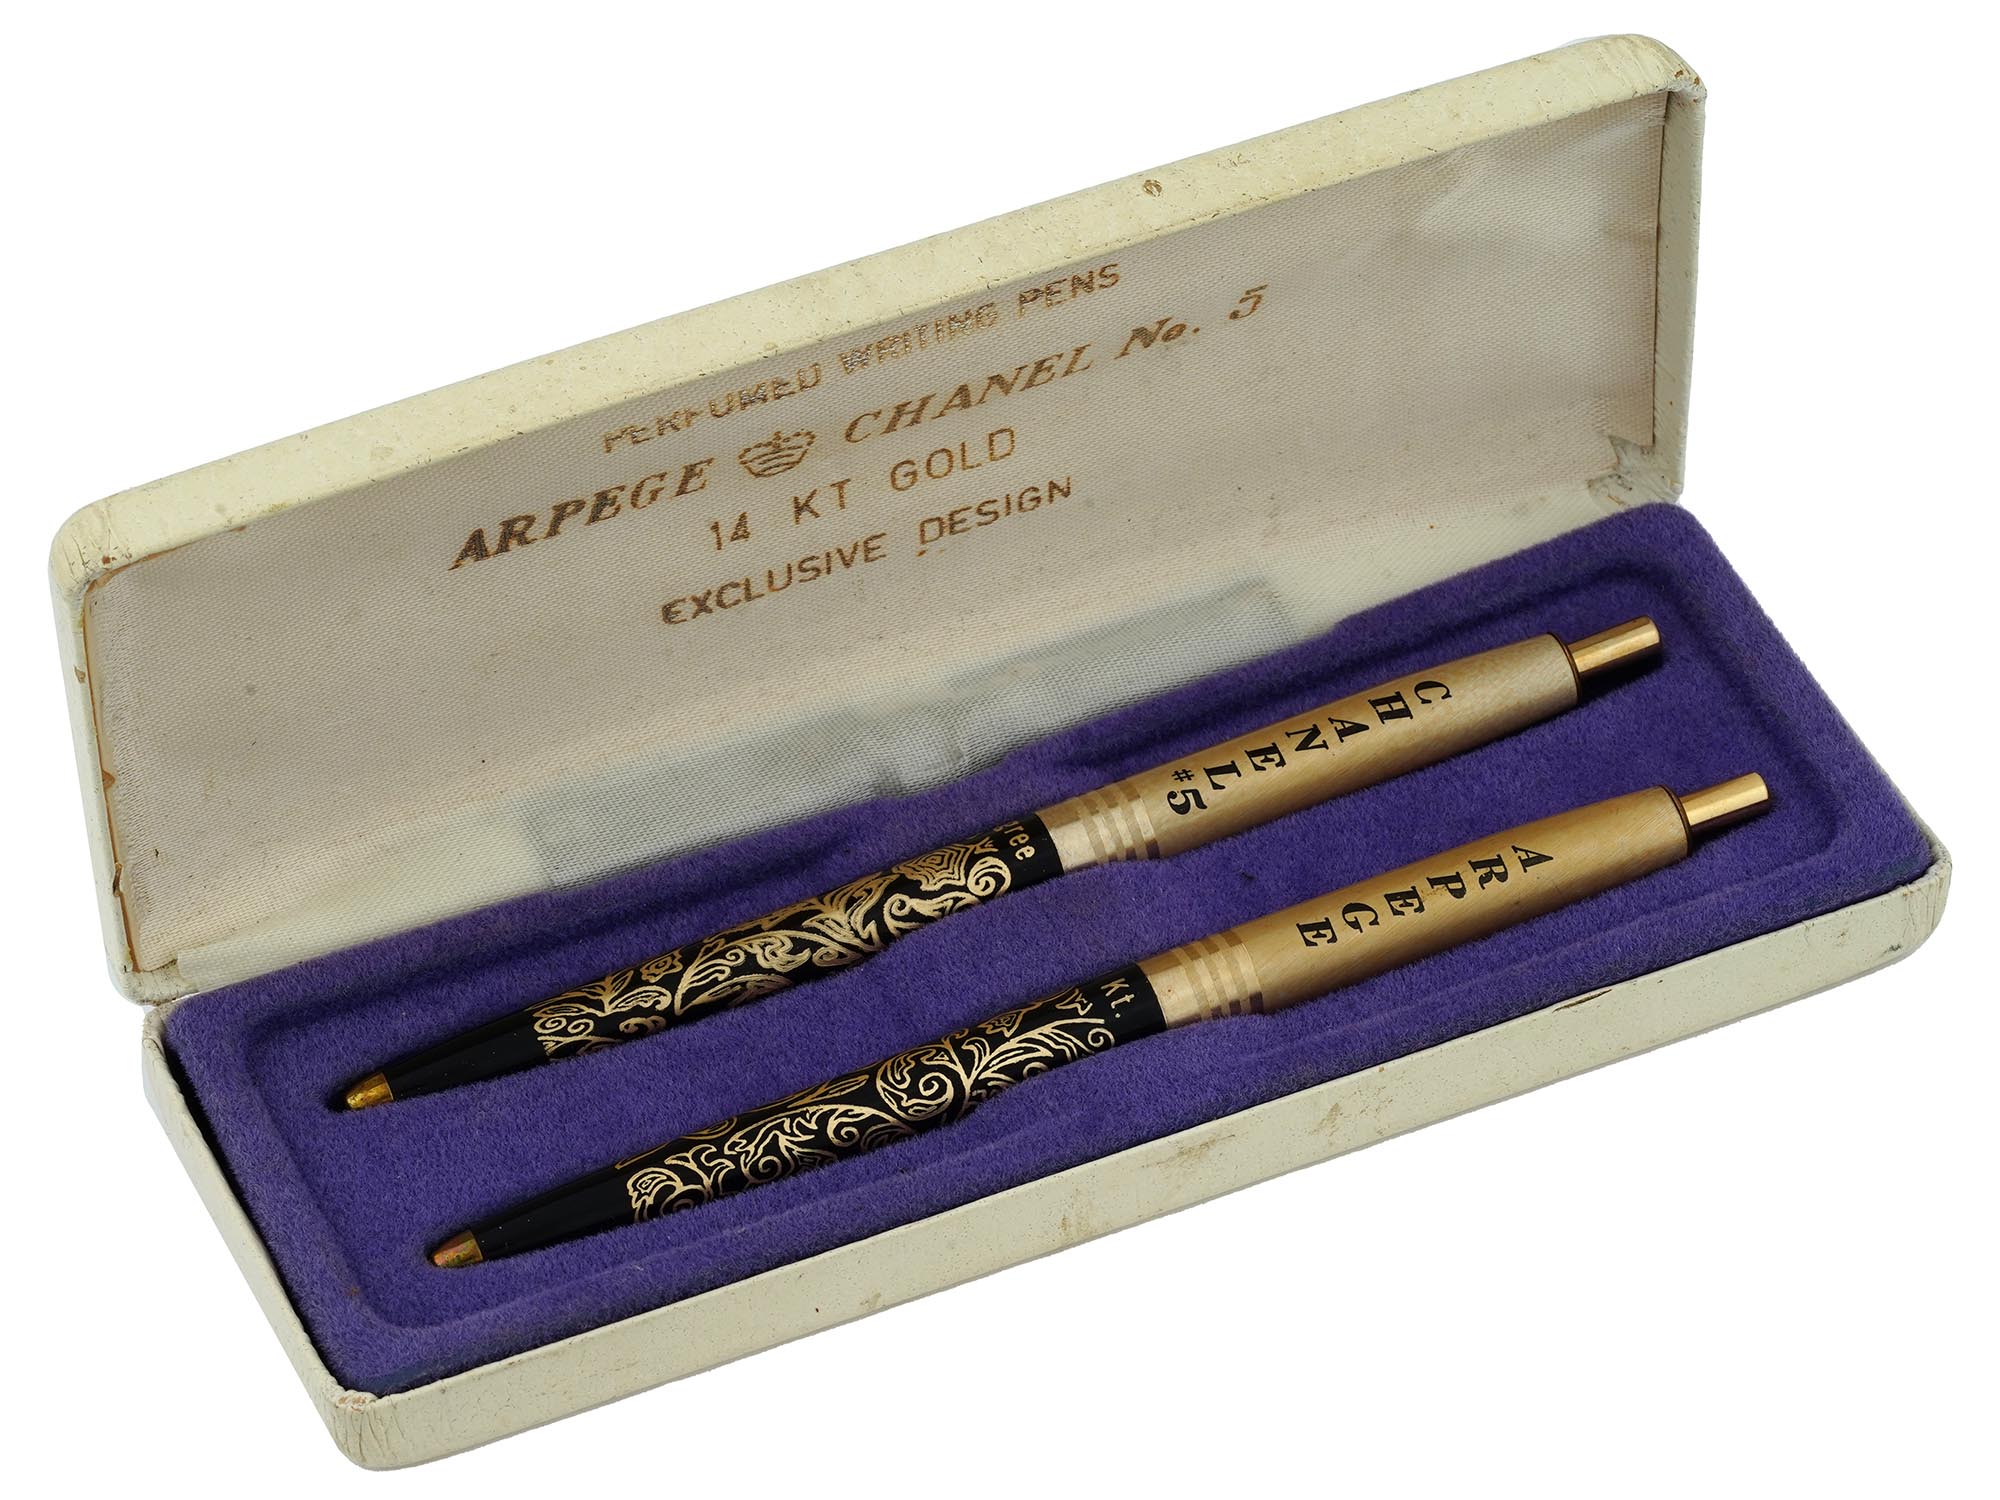 VINTAGE 14K GOLD PERFUMED PENS ARPEGE AND CHANEL NO. 5 PIC-0